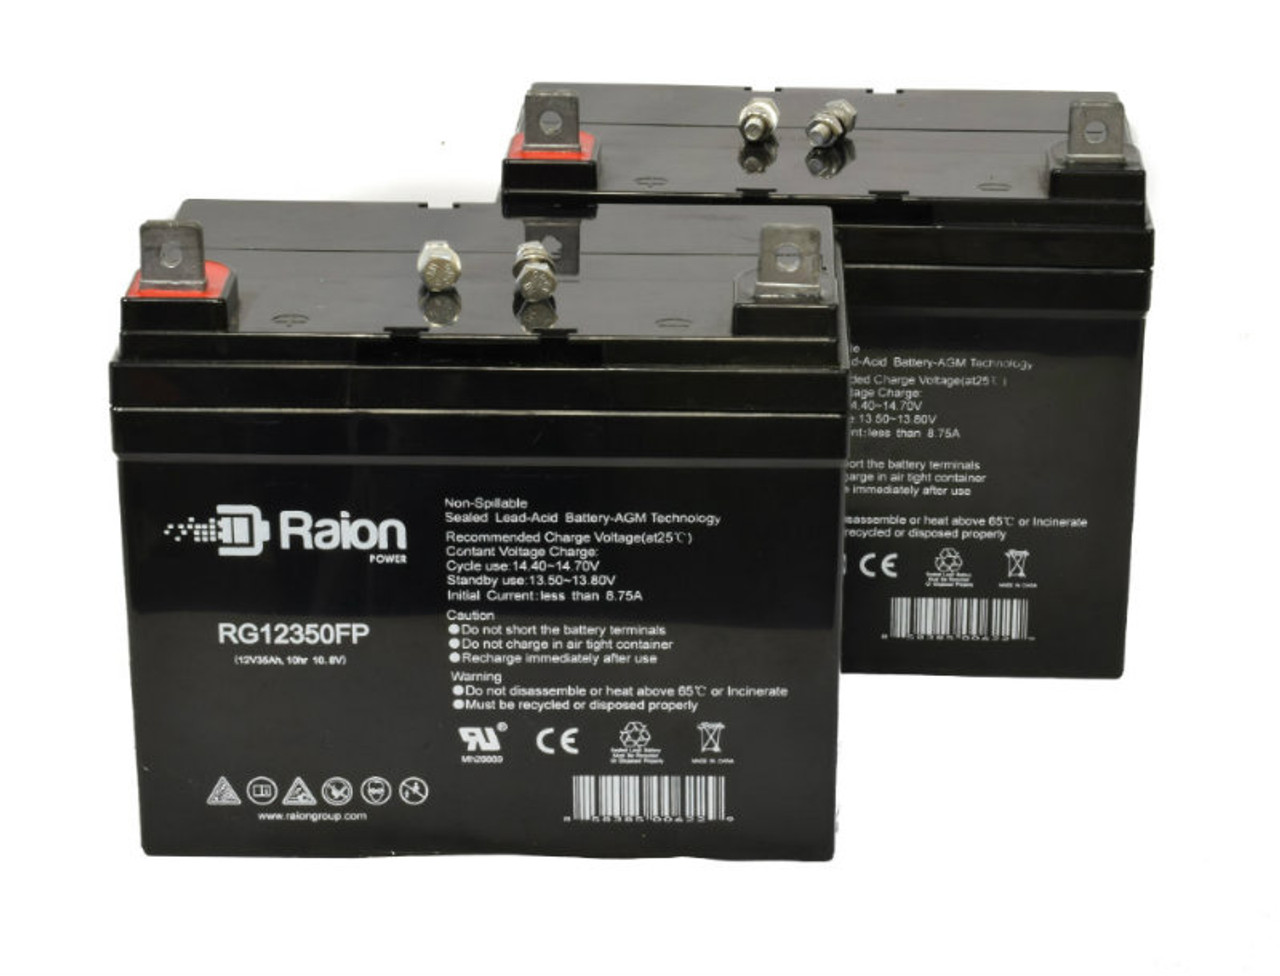 Raion Power Replacement 12V 35Ah Lawn Mower Battery for J.I. Case & Case Ih Lawn 222 - 2 Pack